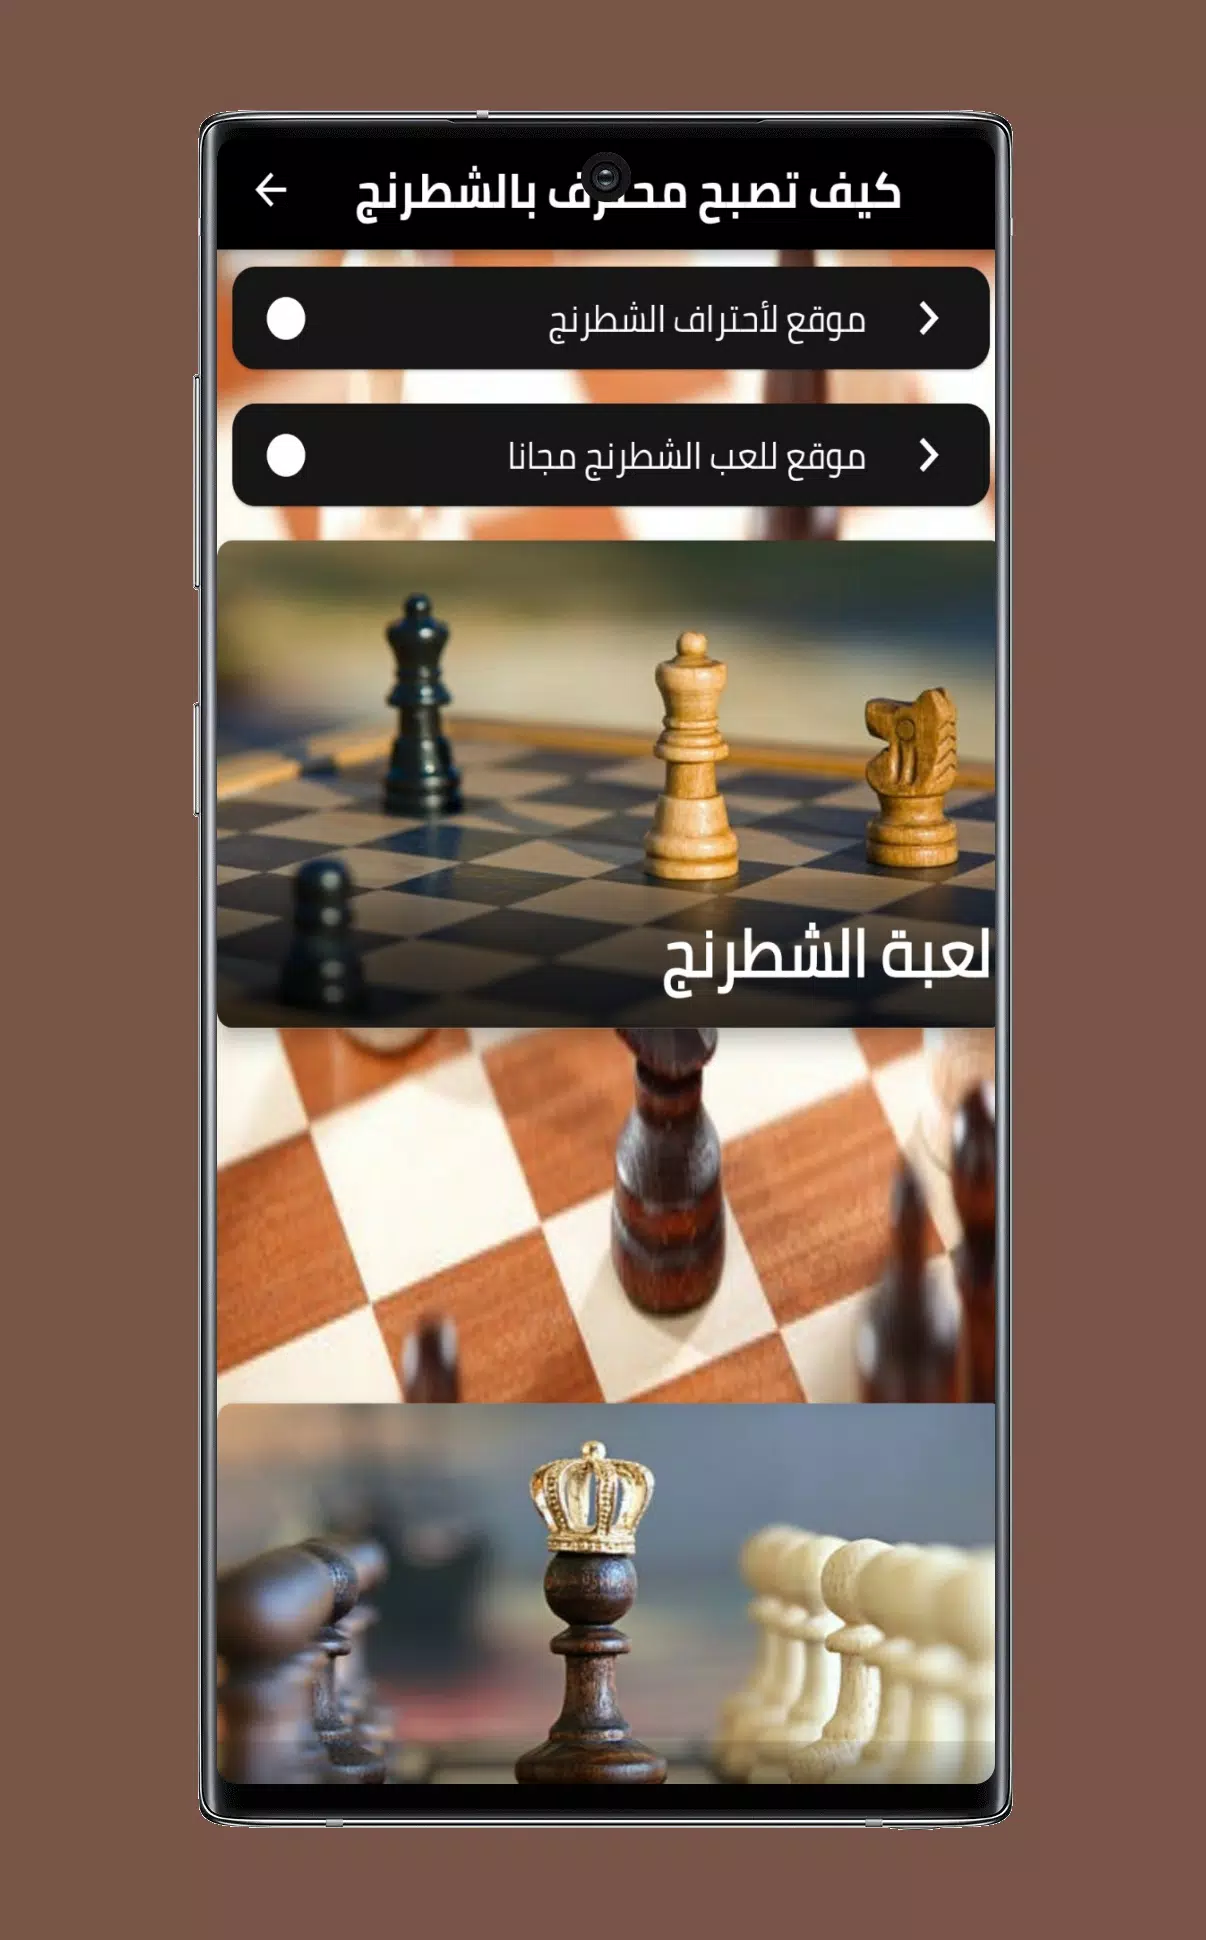 Chess - lichess APK Download for Android Free